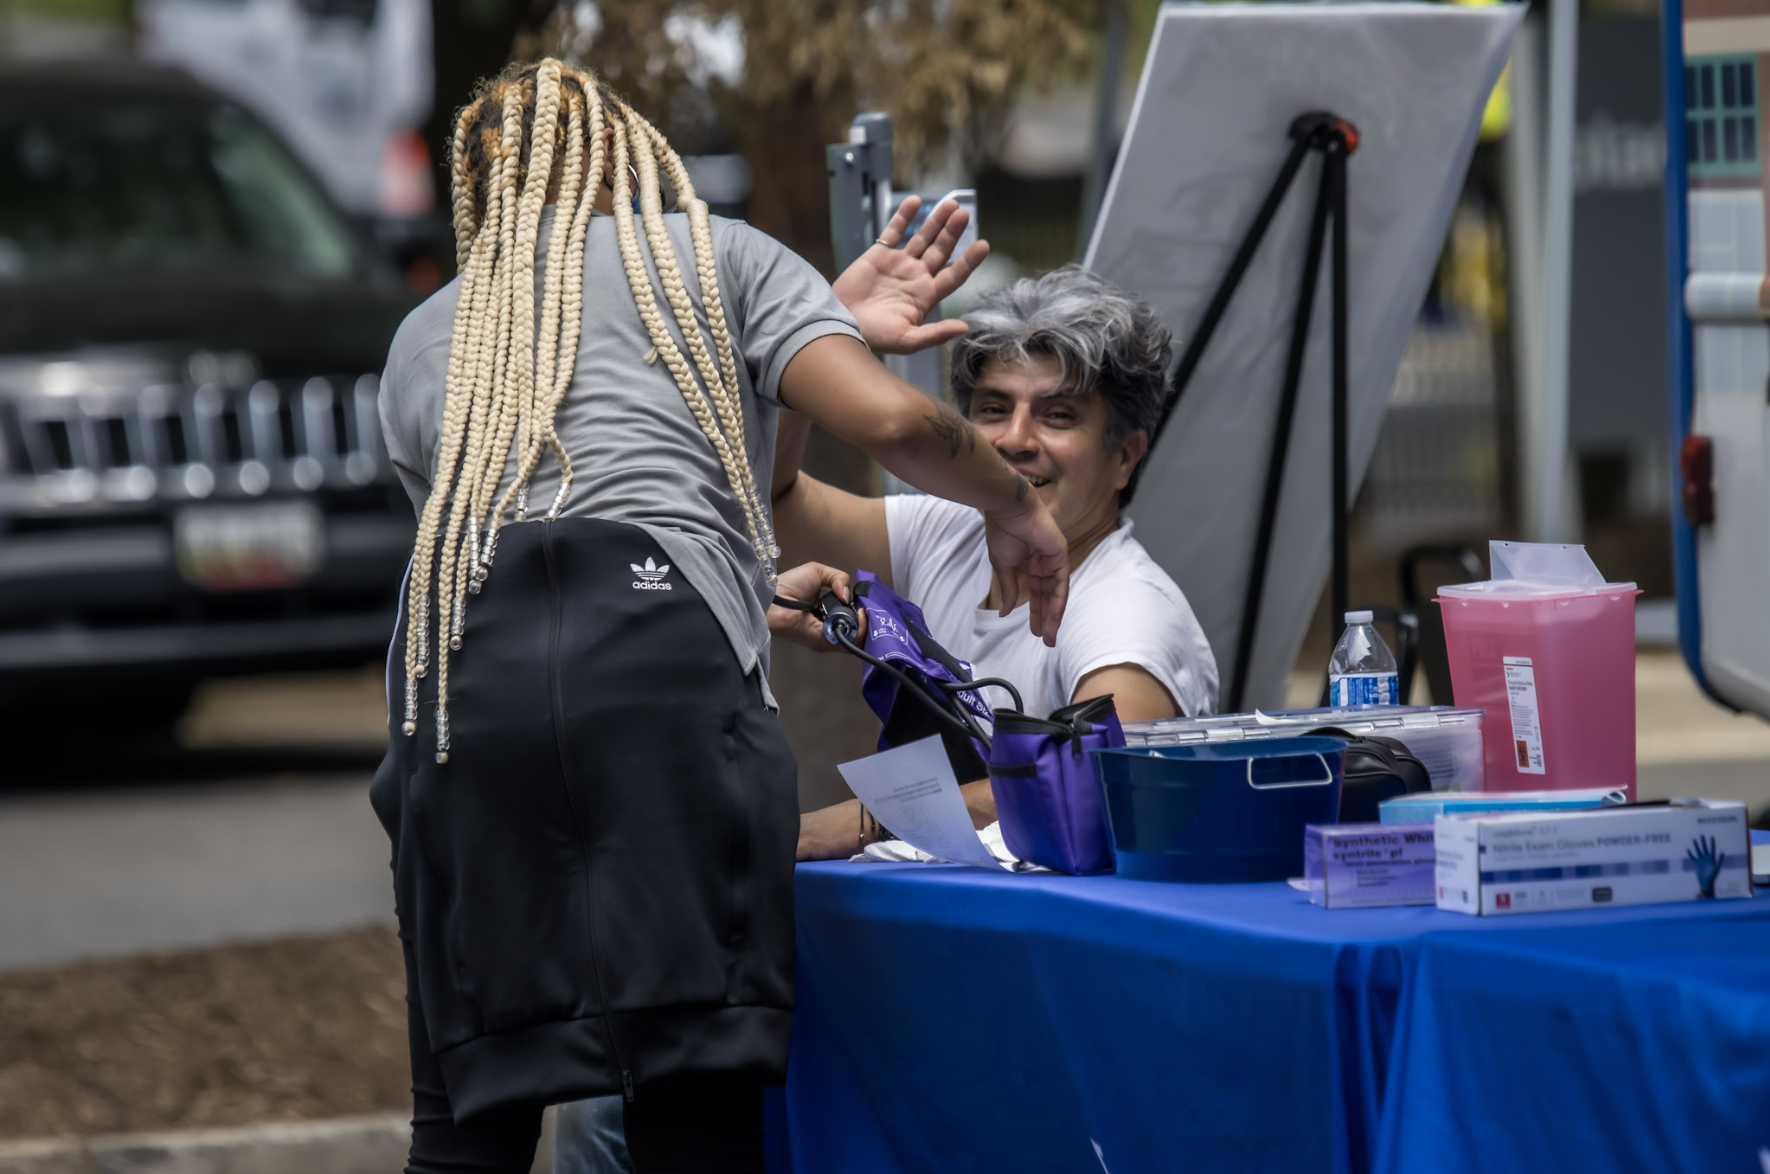 A woman reading a man's blood pressure at a tabling event. The woman's back is turned while the man is waving and smiling at the camera.